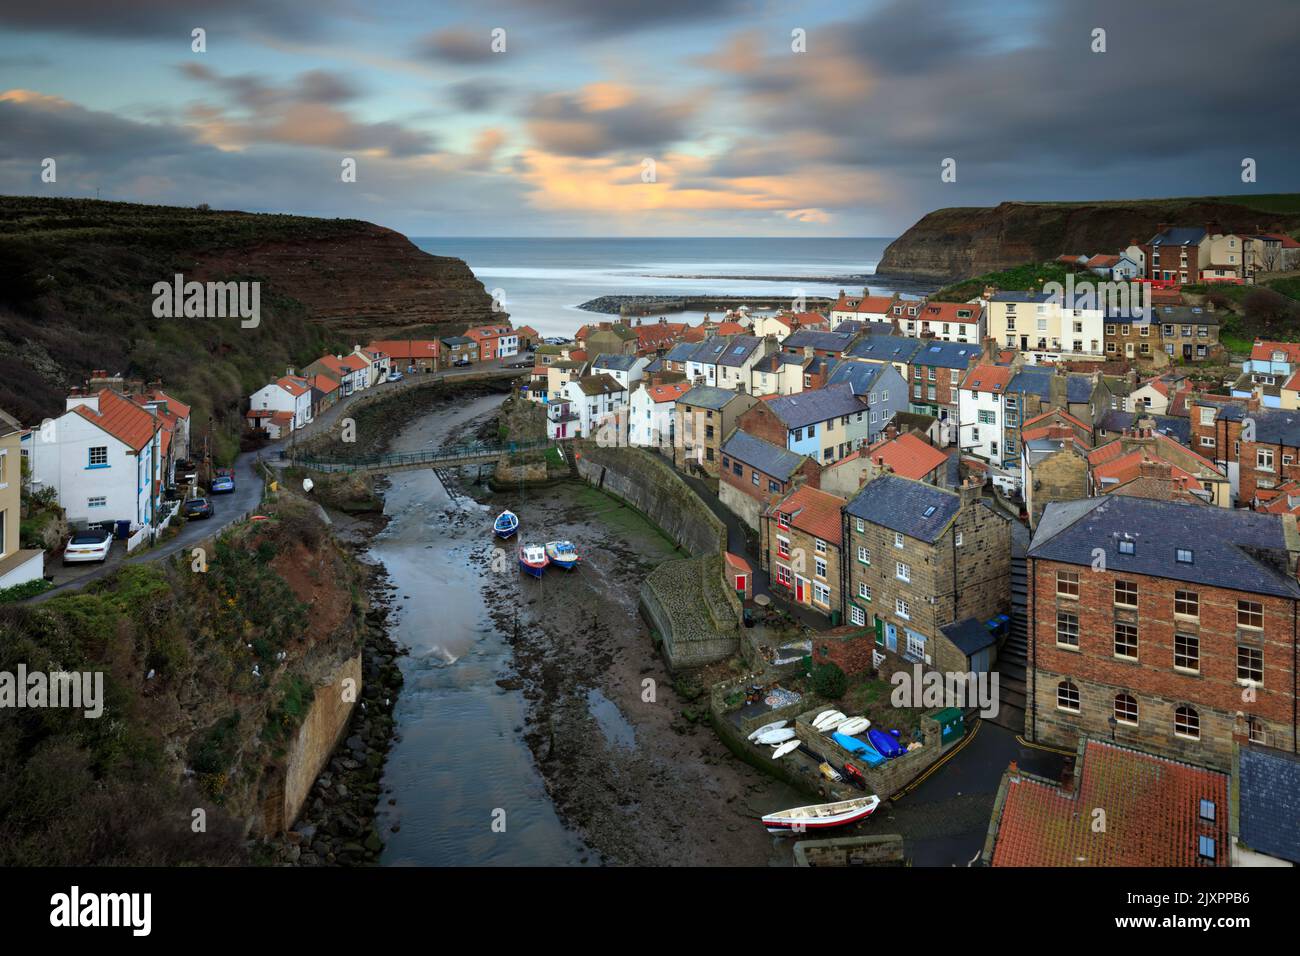 Clouds over the village of Staithes on the North Yorkshire Coast illuminated by the setting sun. Stock Photo